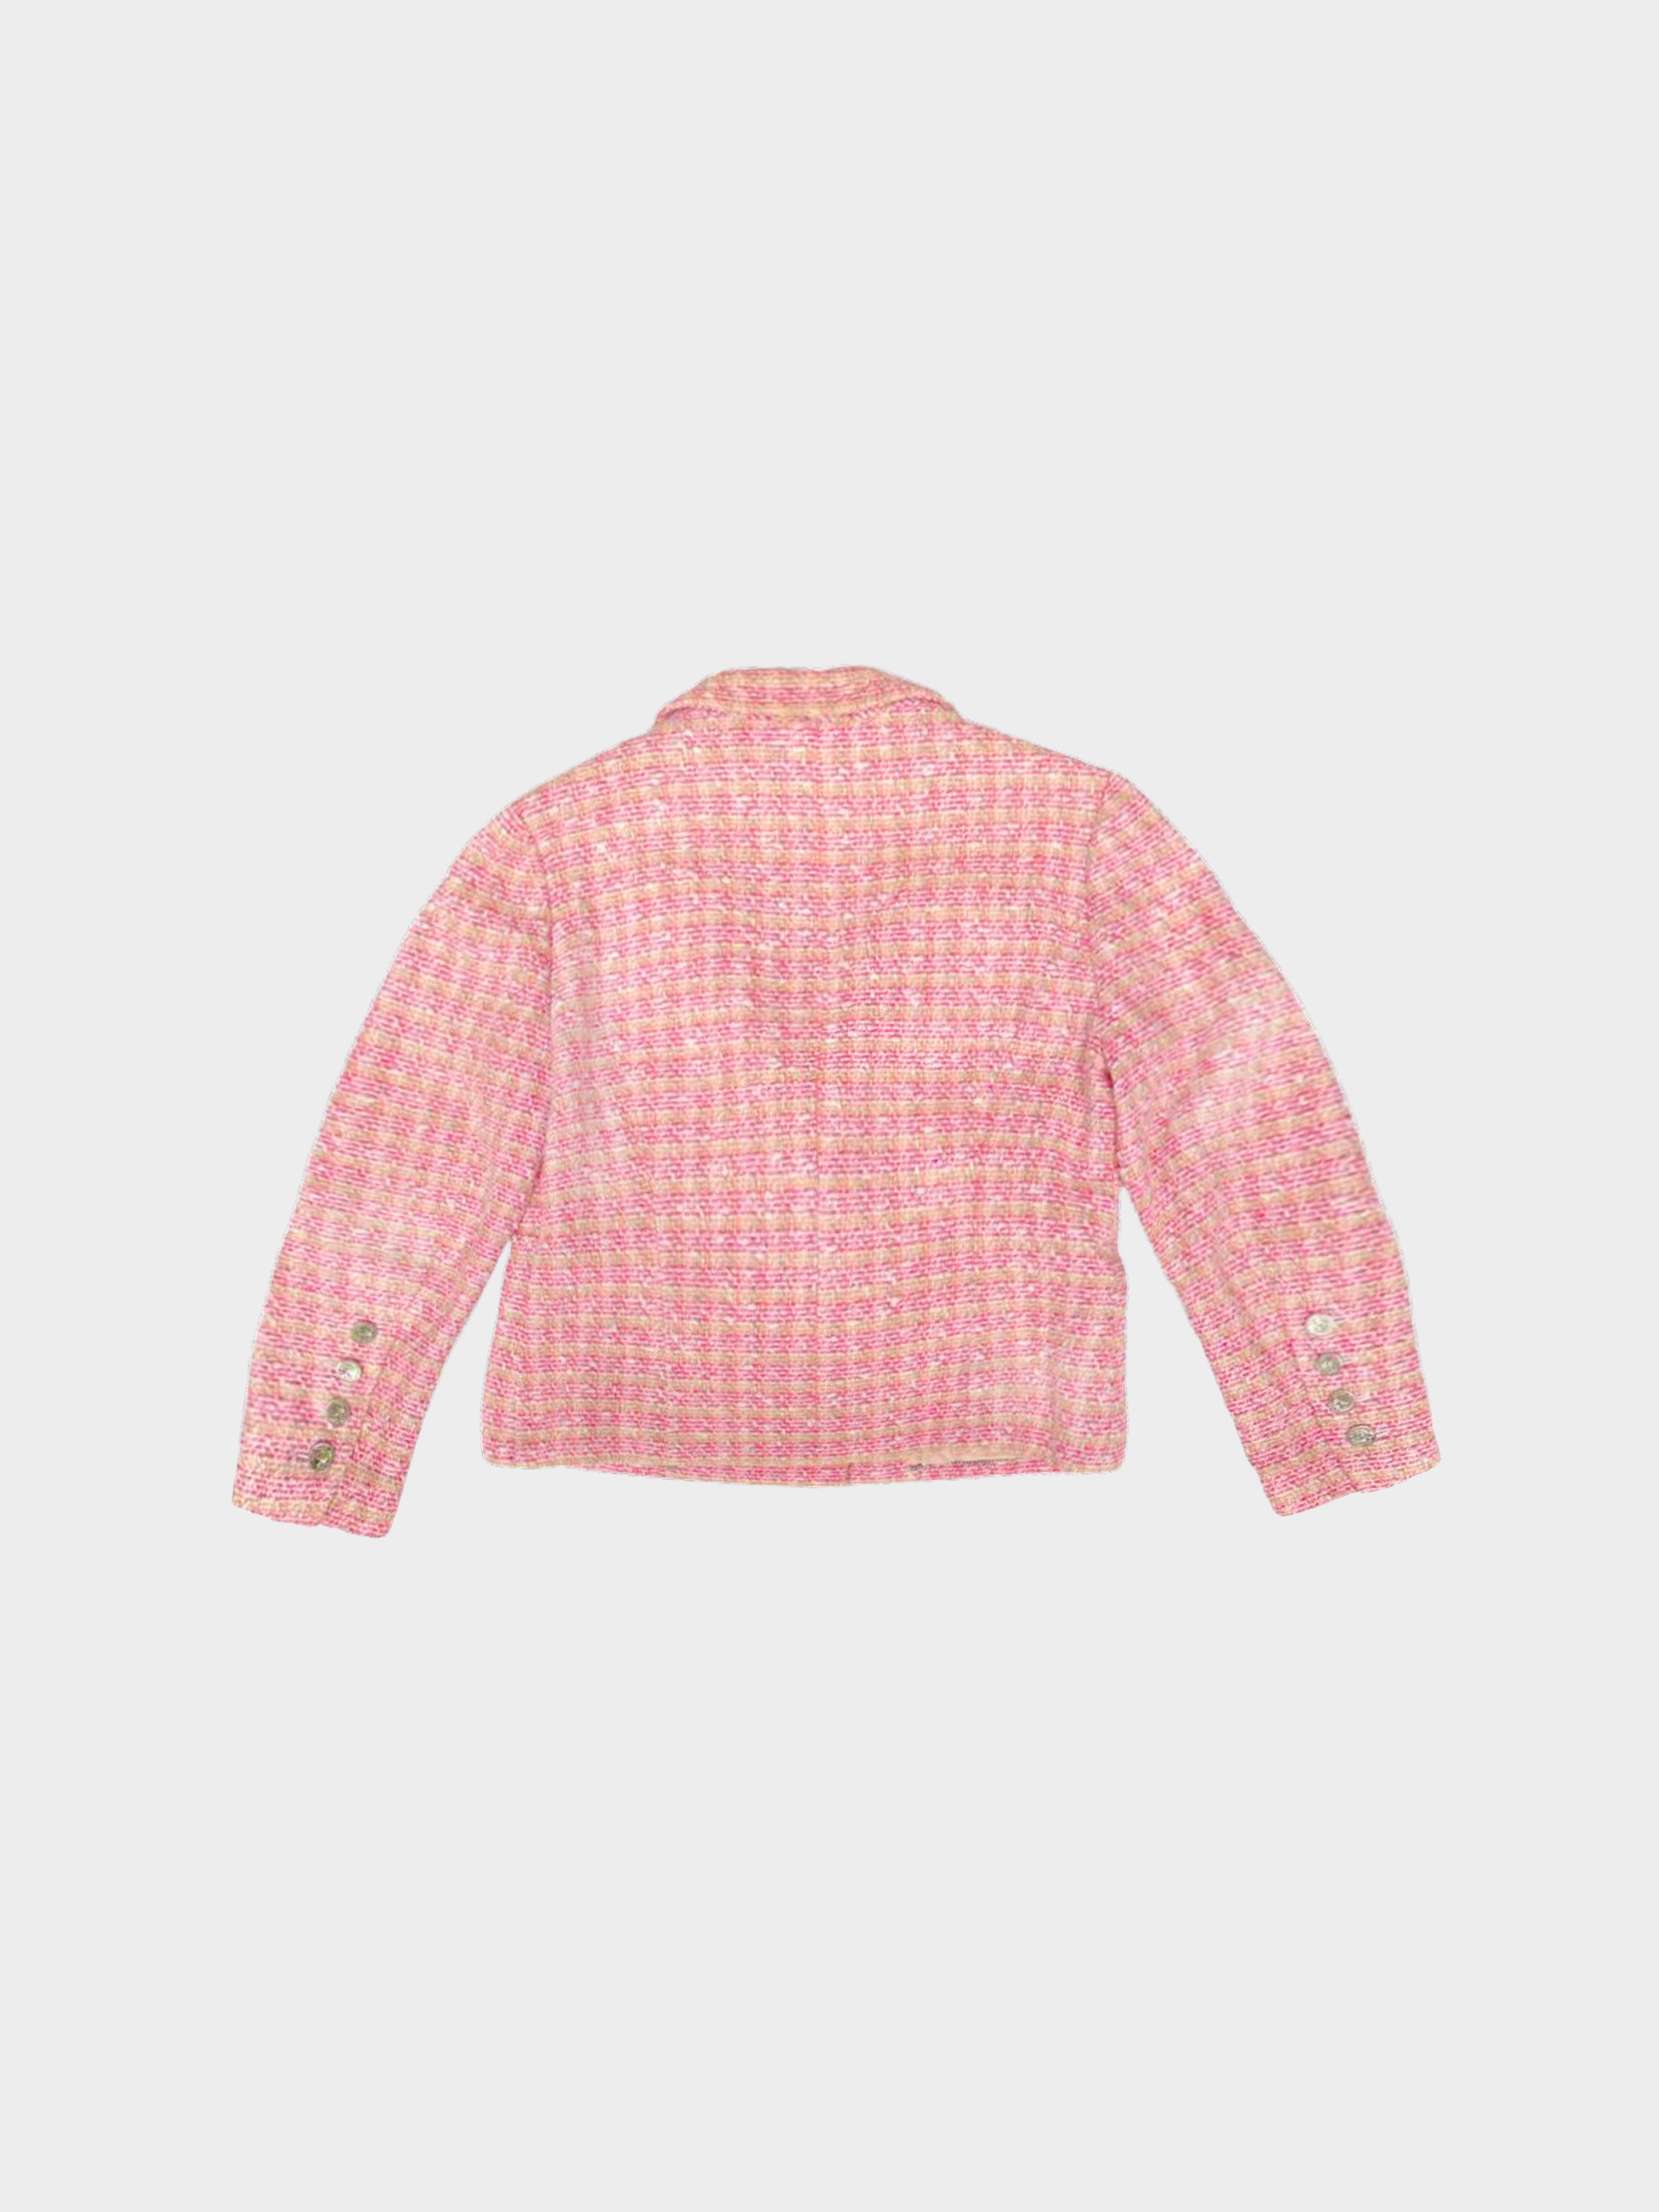 Chanel 1980s Pink Tweed Boucle Double Breasted Blazer · INTO